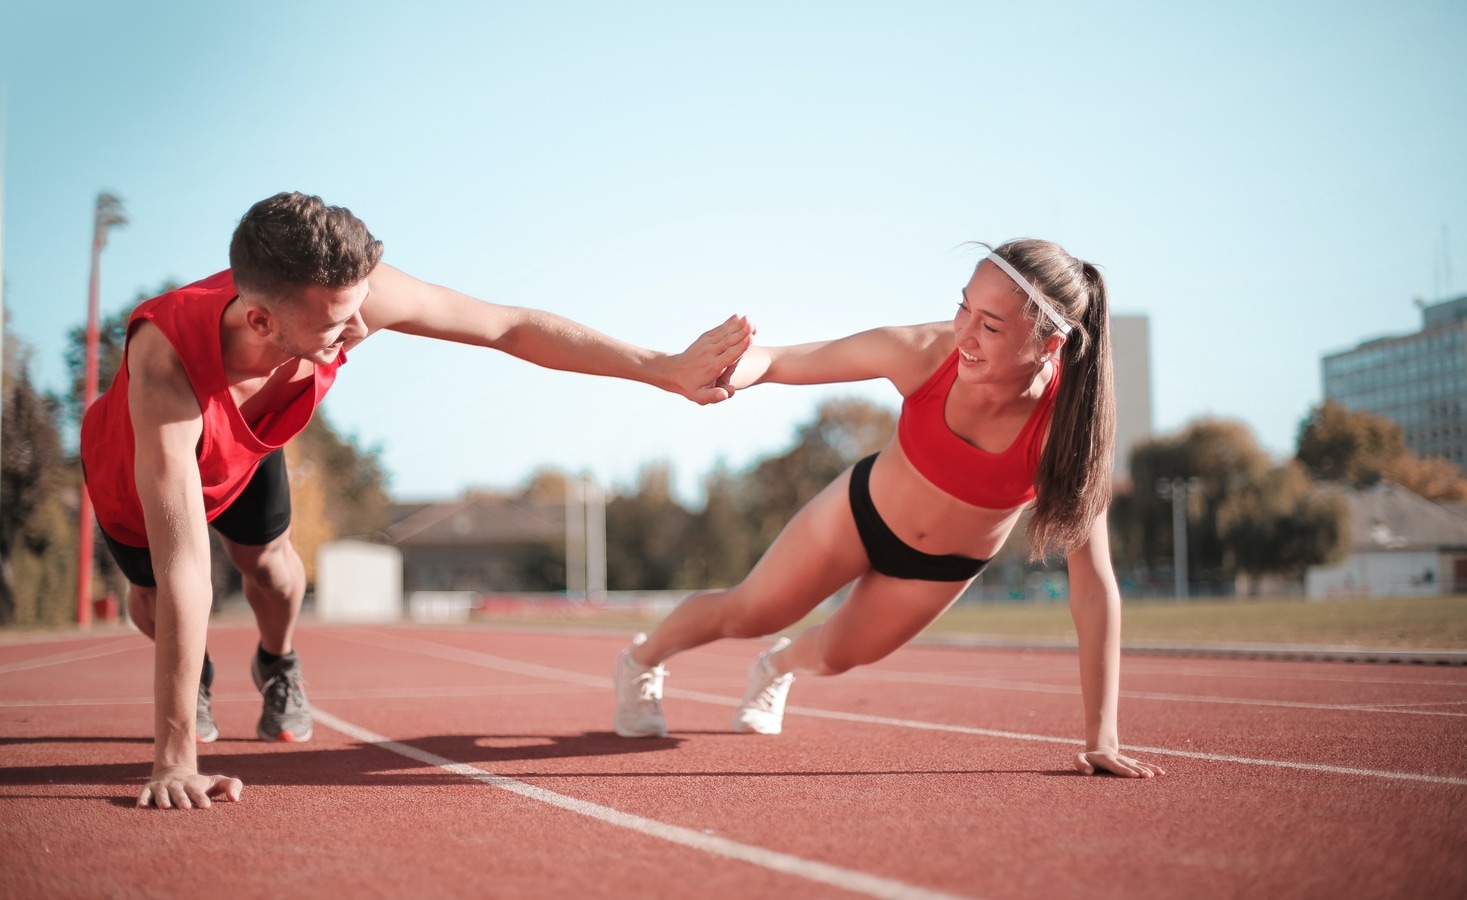 Medically approved health tips to improve an athlete's physical fitness